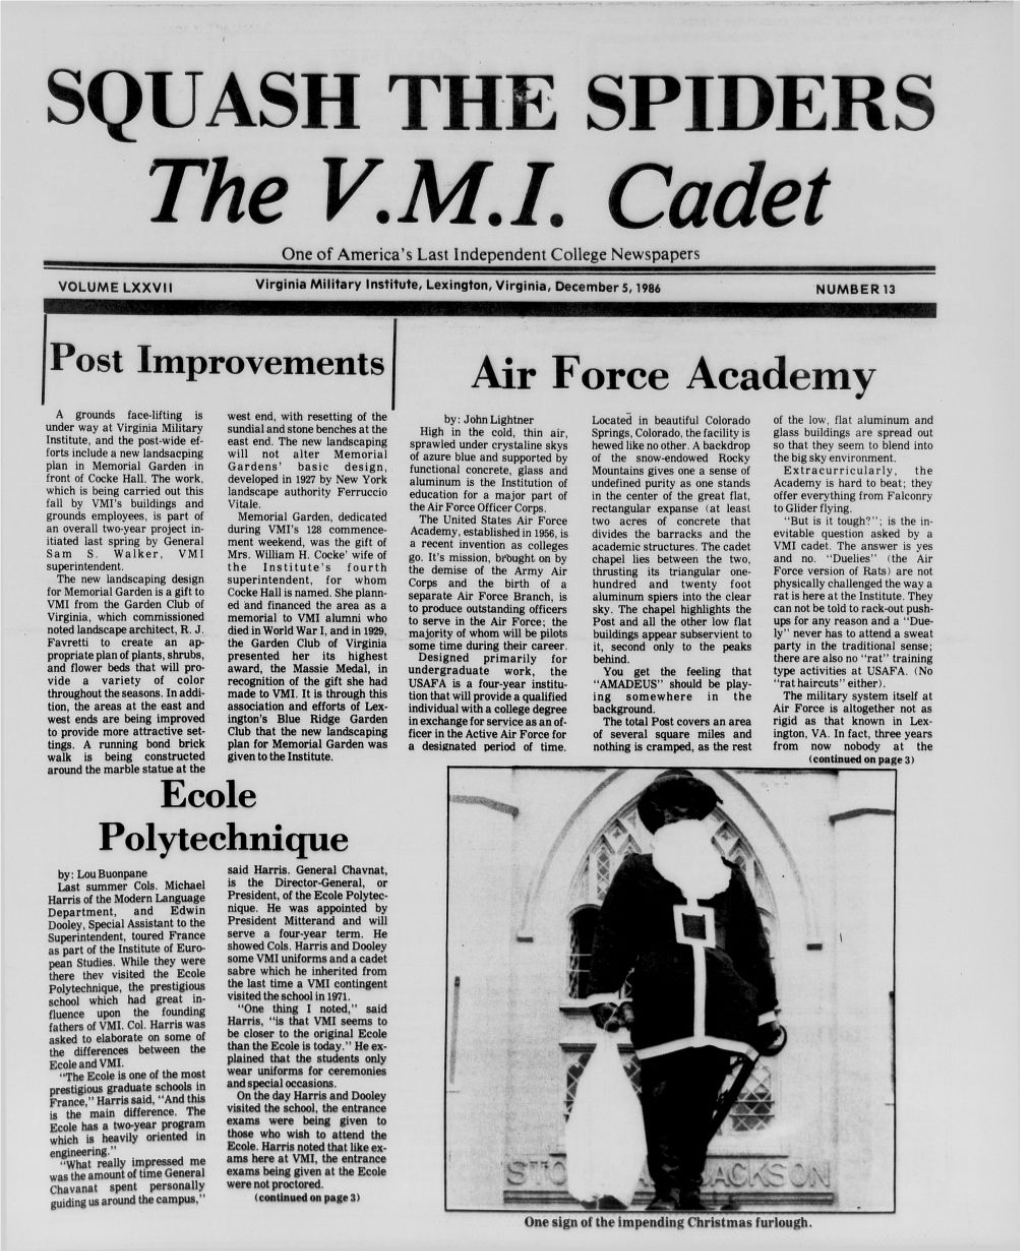 The V.M.L Cadet One of America's Last Independent College Newspapers